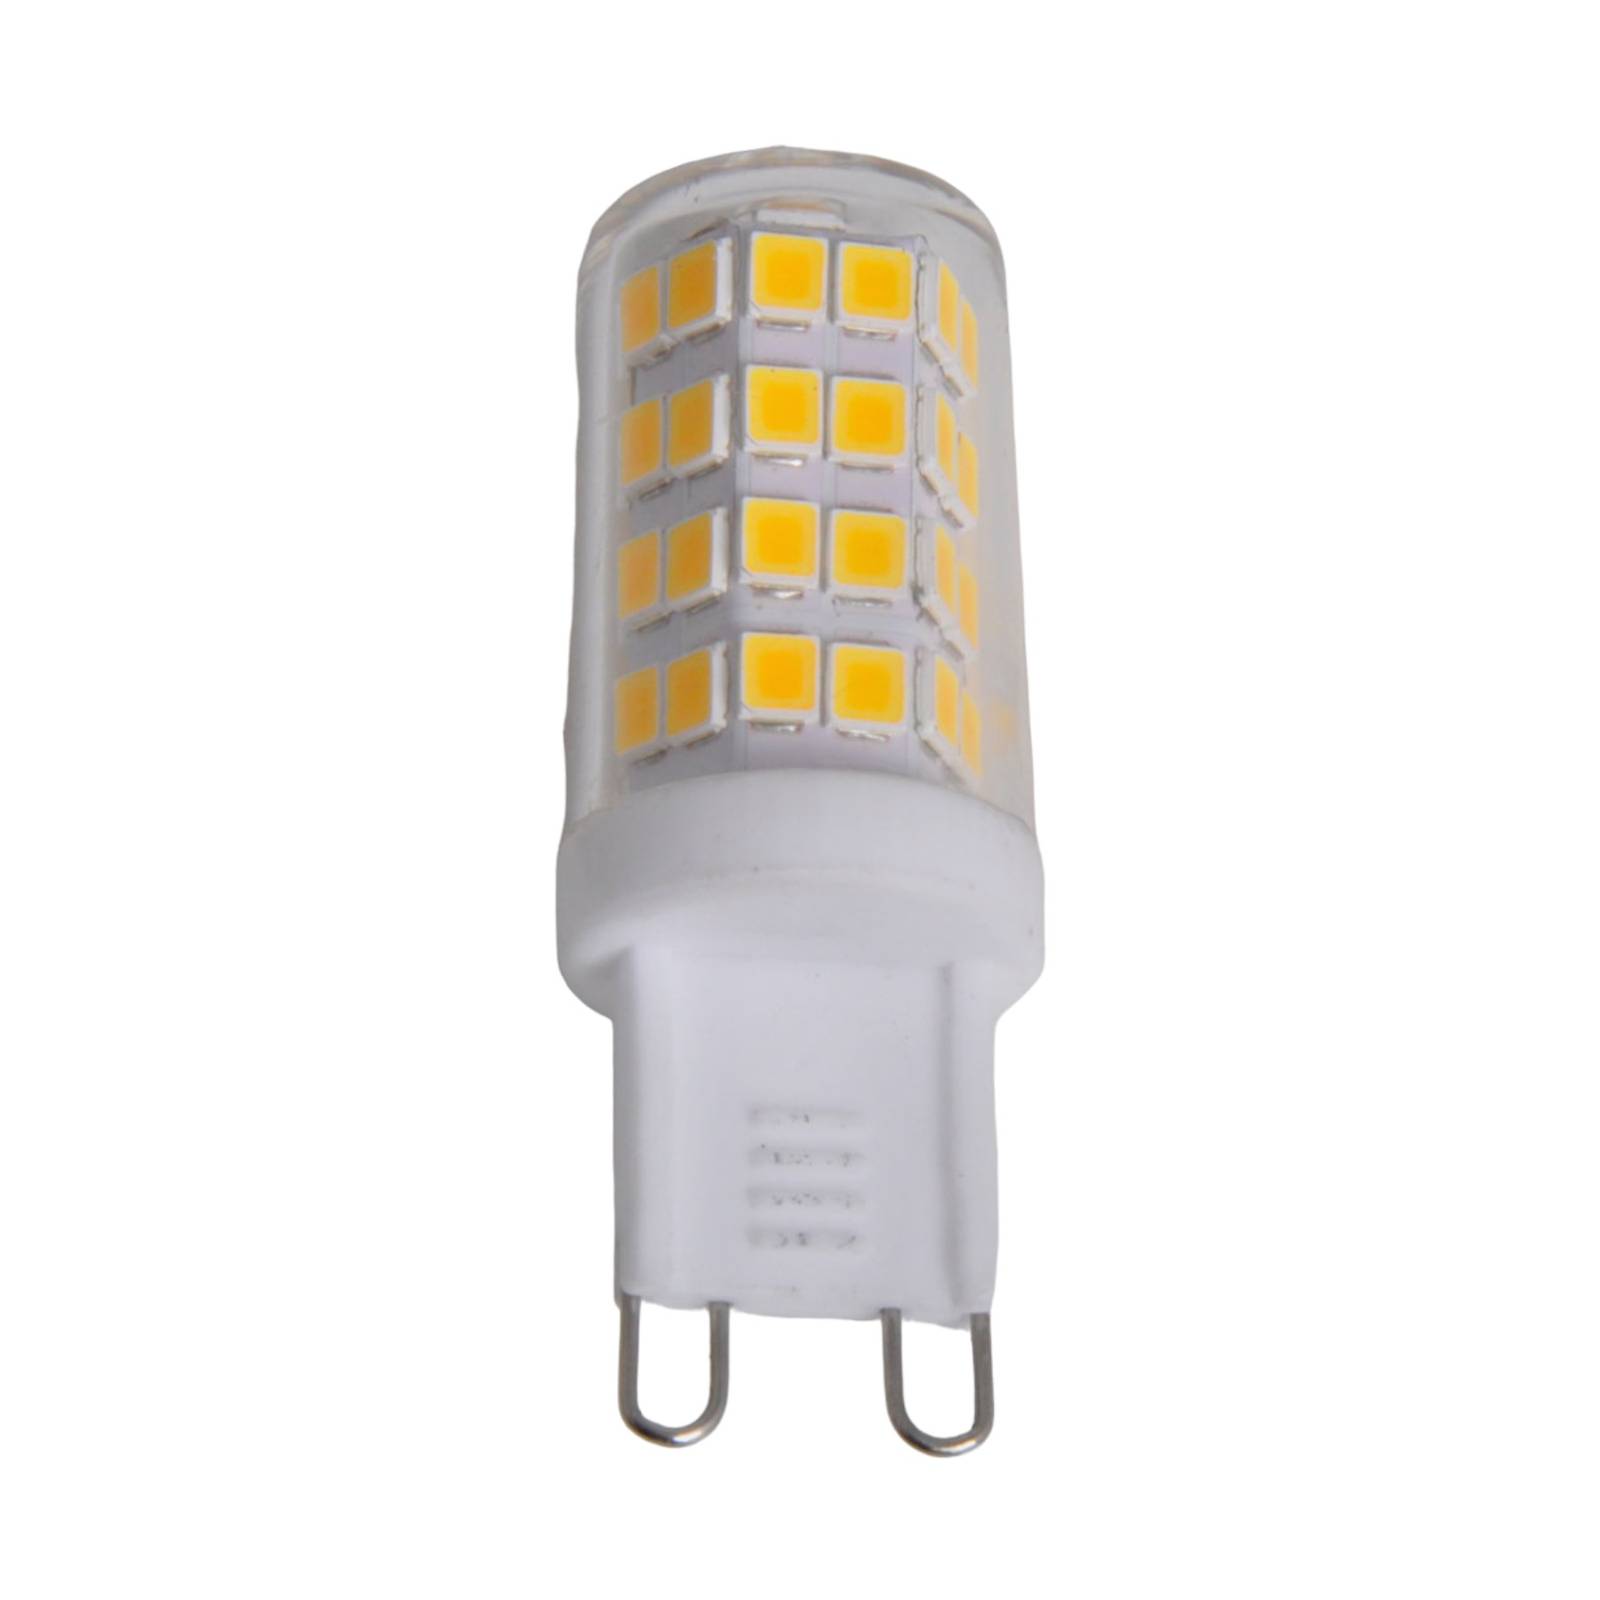 Image of Ampoule à broches LED G9 3 W, blanc chaud, 330 lm 4251096535167